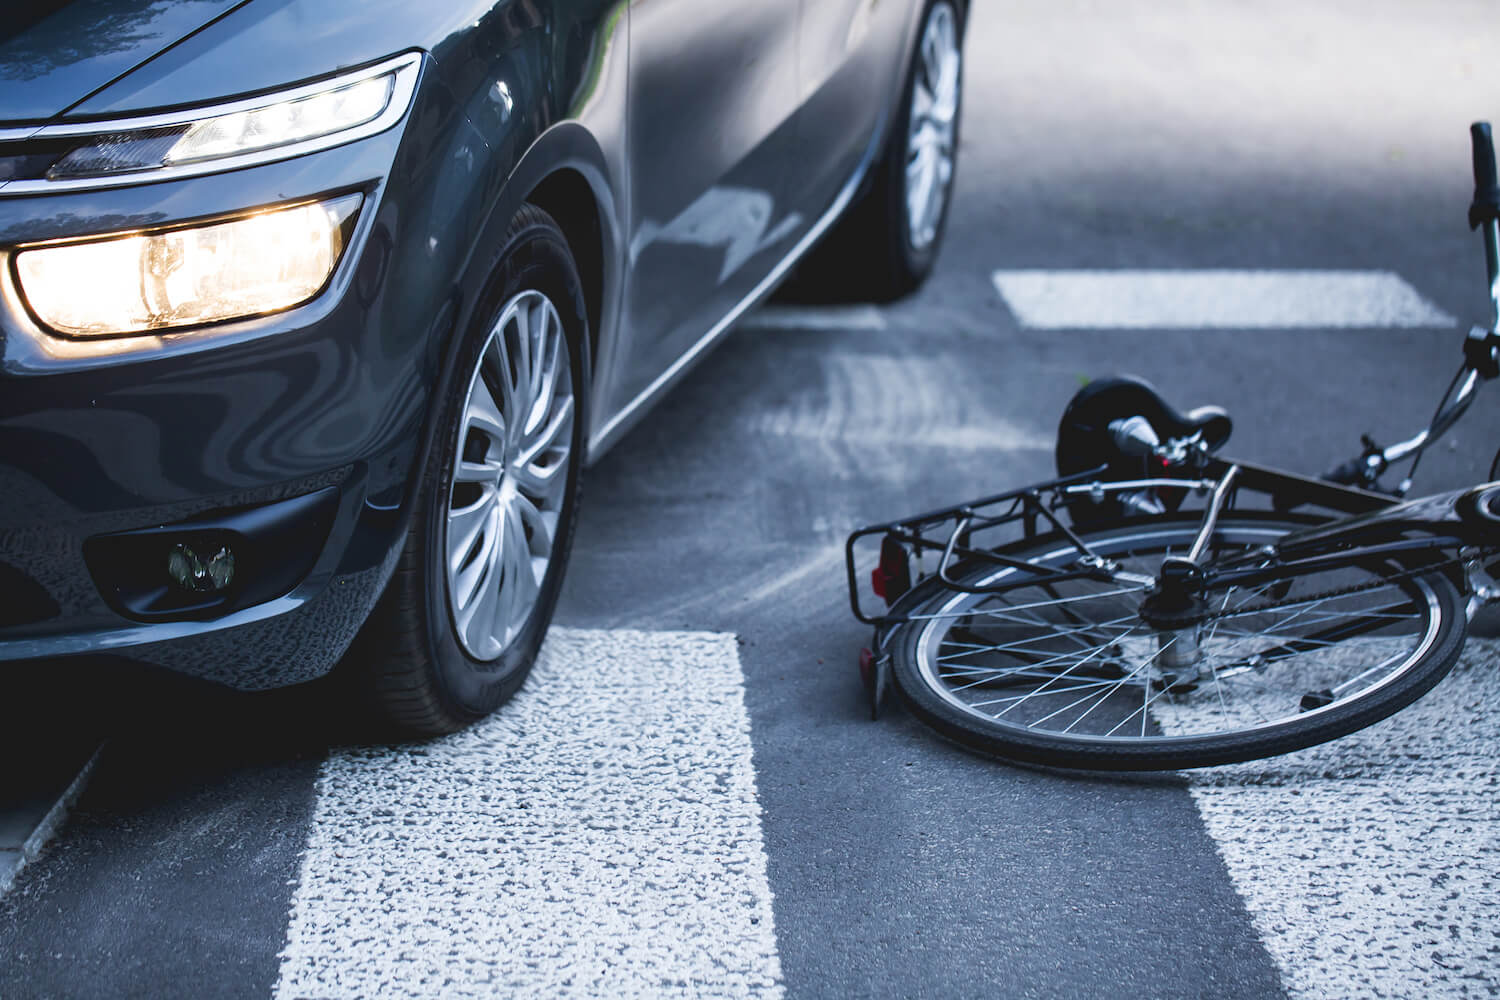 Bicycle Accident Lawyer in Las Vegas